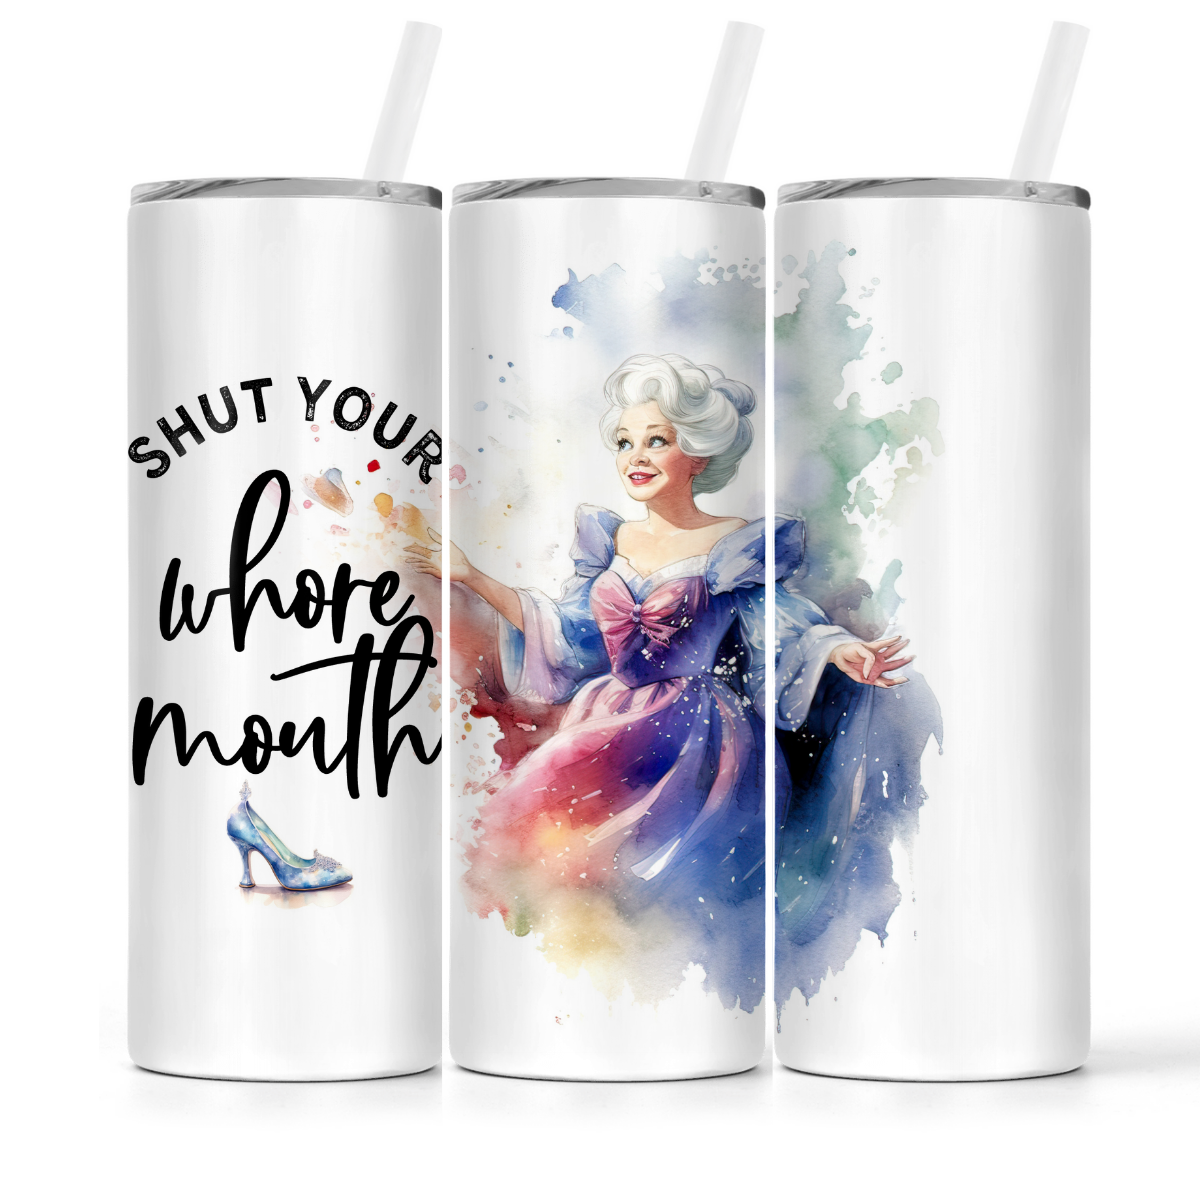 Shut Your Whore Mouth | 20oz Tumbler - The Pretty Things.ca